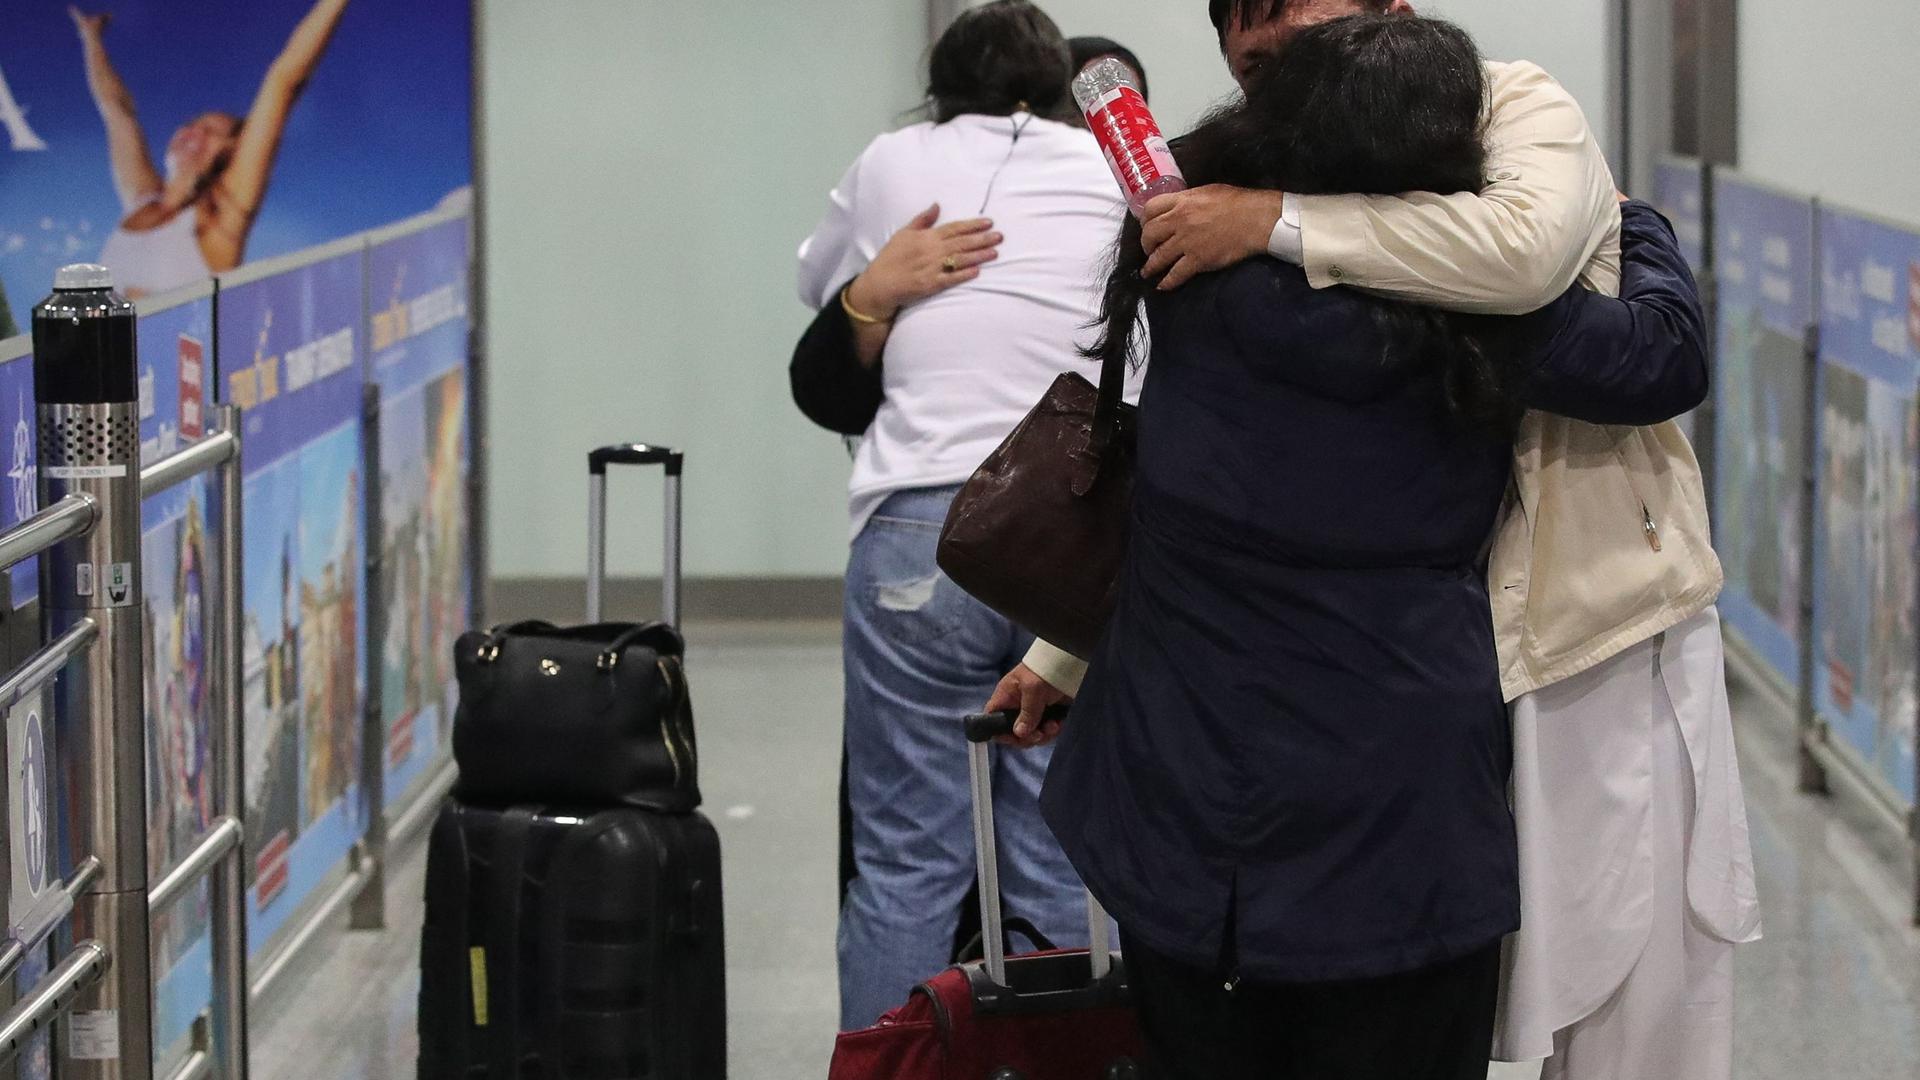 People among the first evacuees from Kabul, hug as they arrive at Frankfurt International Airport in western Germany in the early hours of August 18, 2021. (Photo by Armando BABANI / AFP)